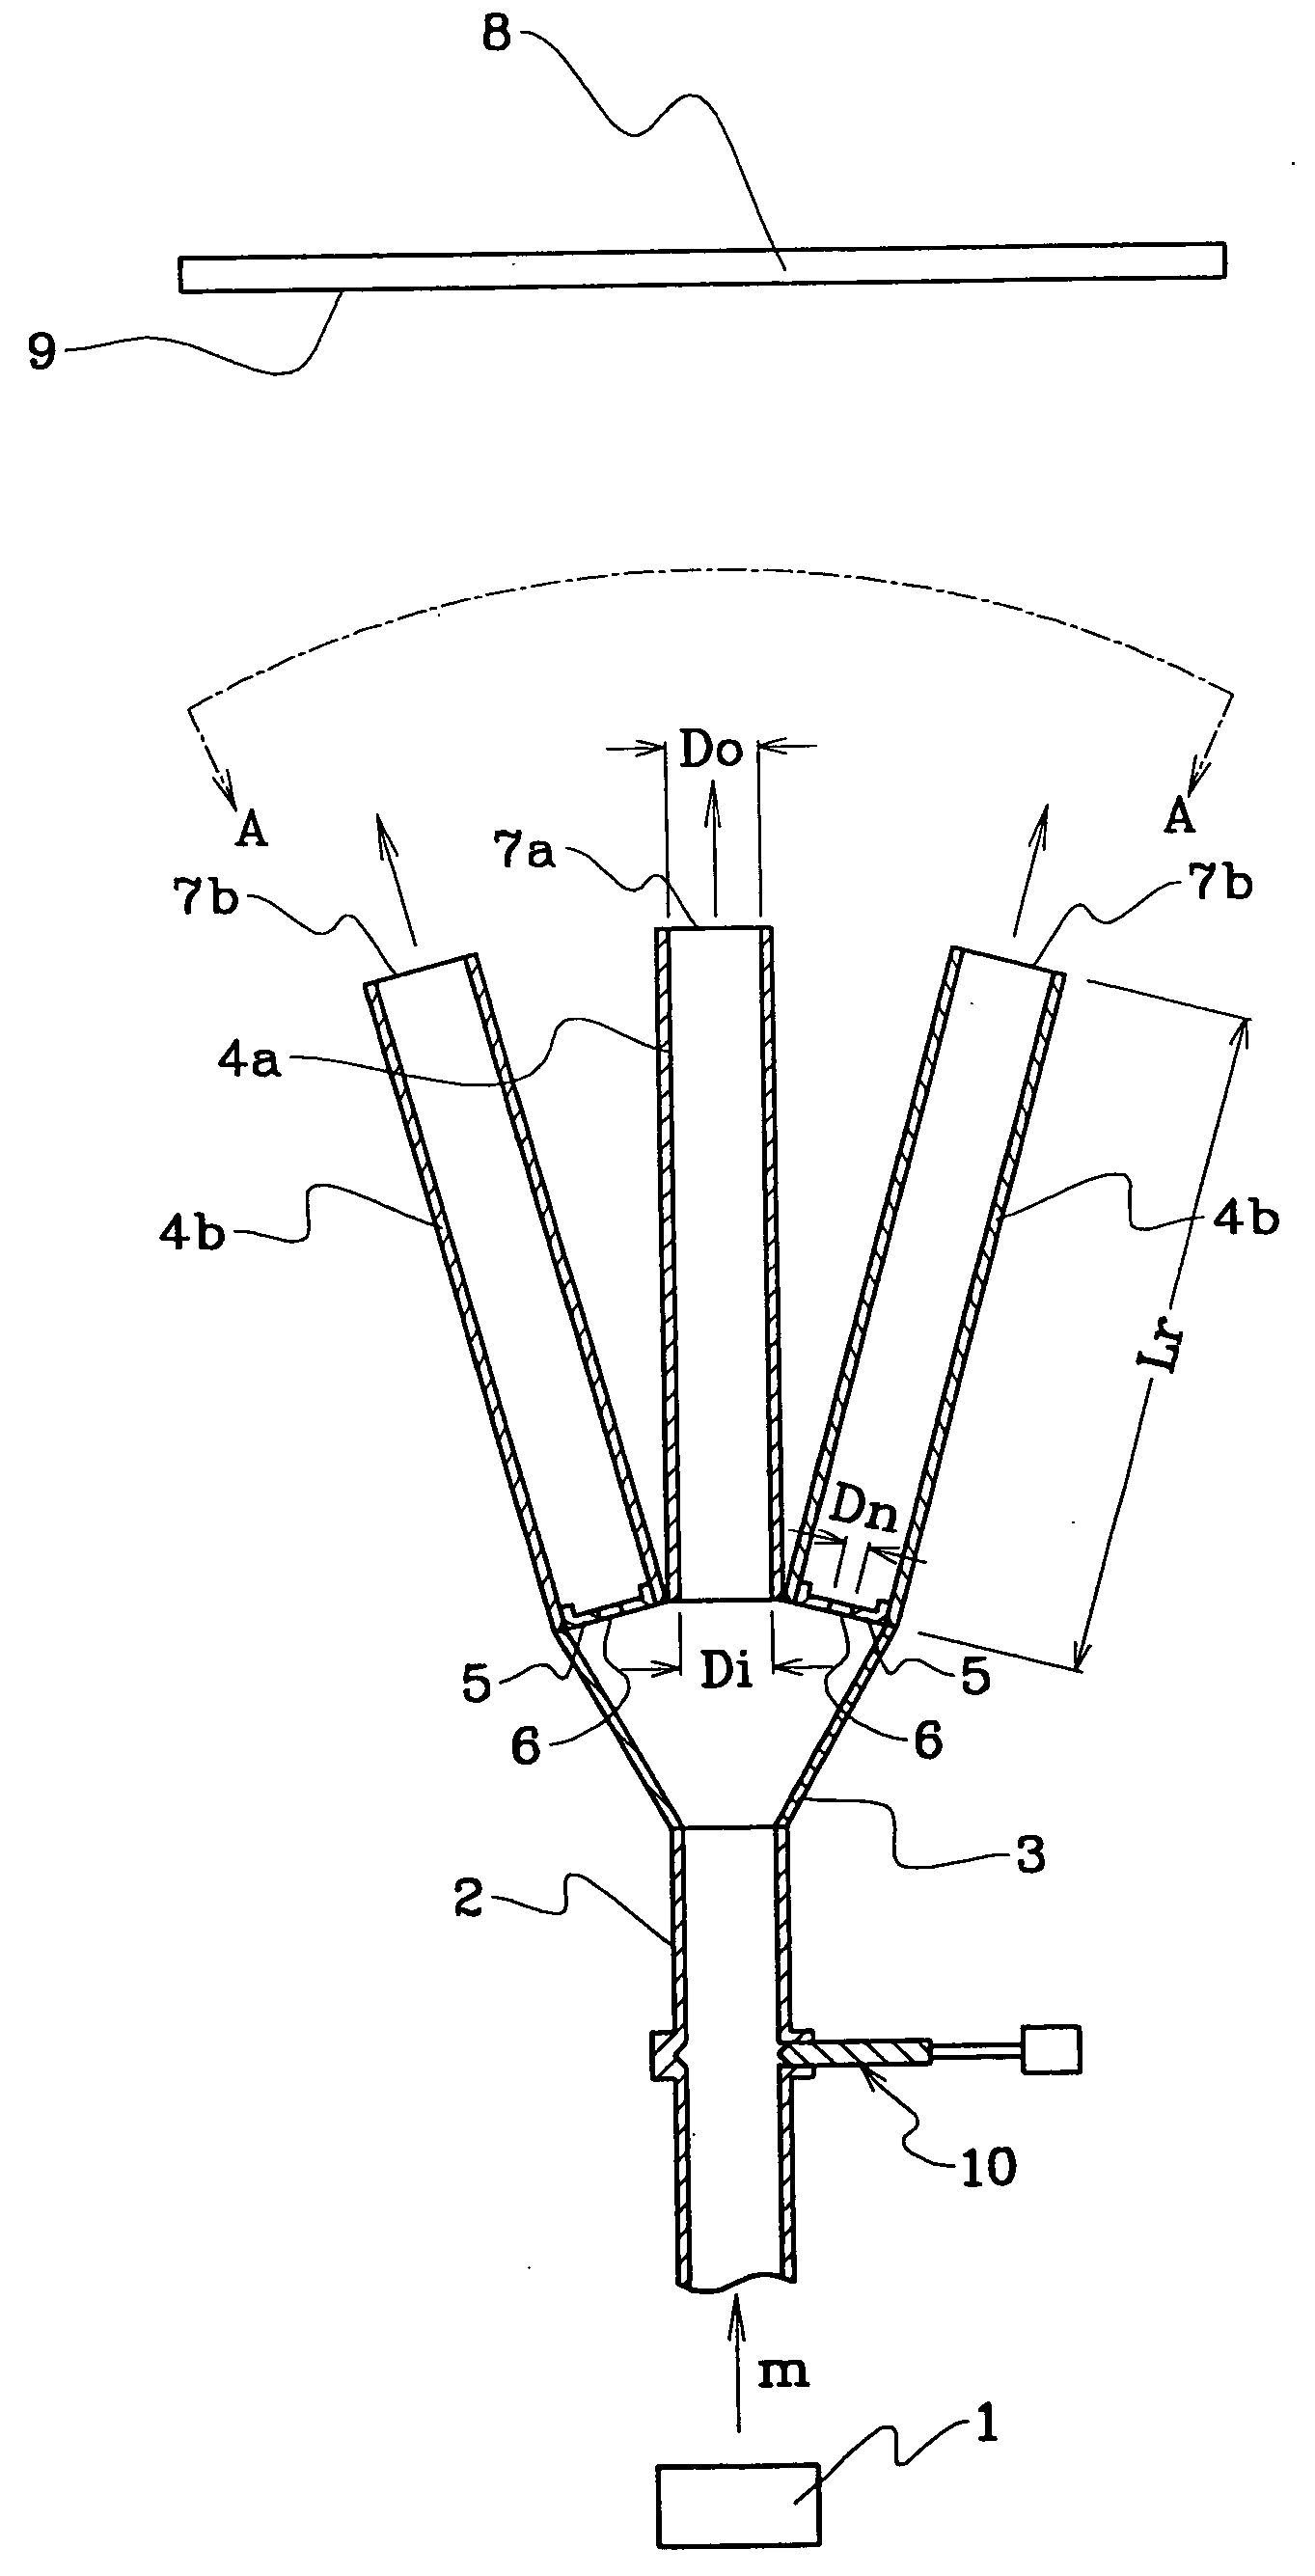 Molecule supply source for use in thin-film forming